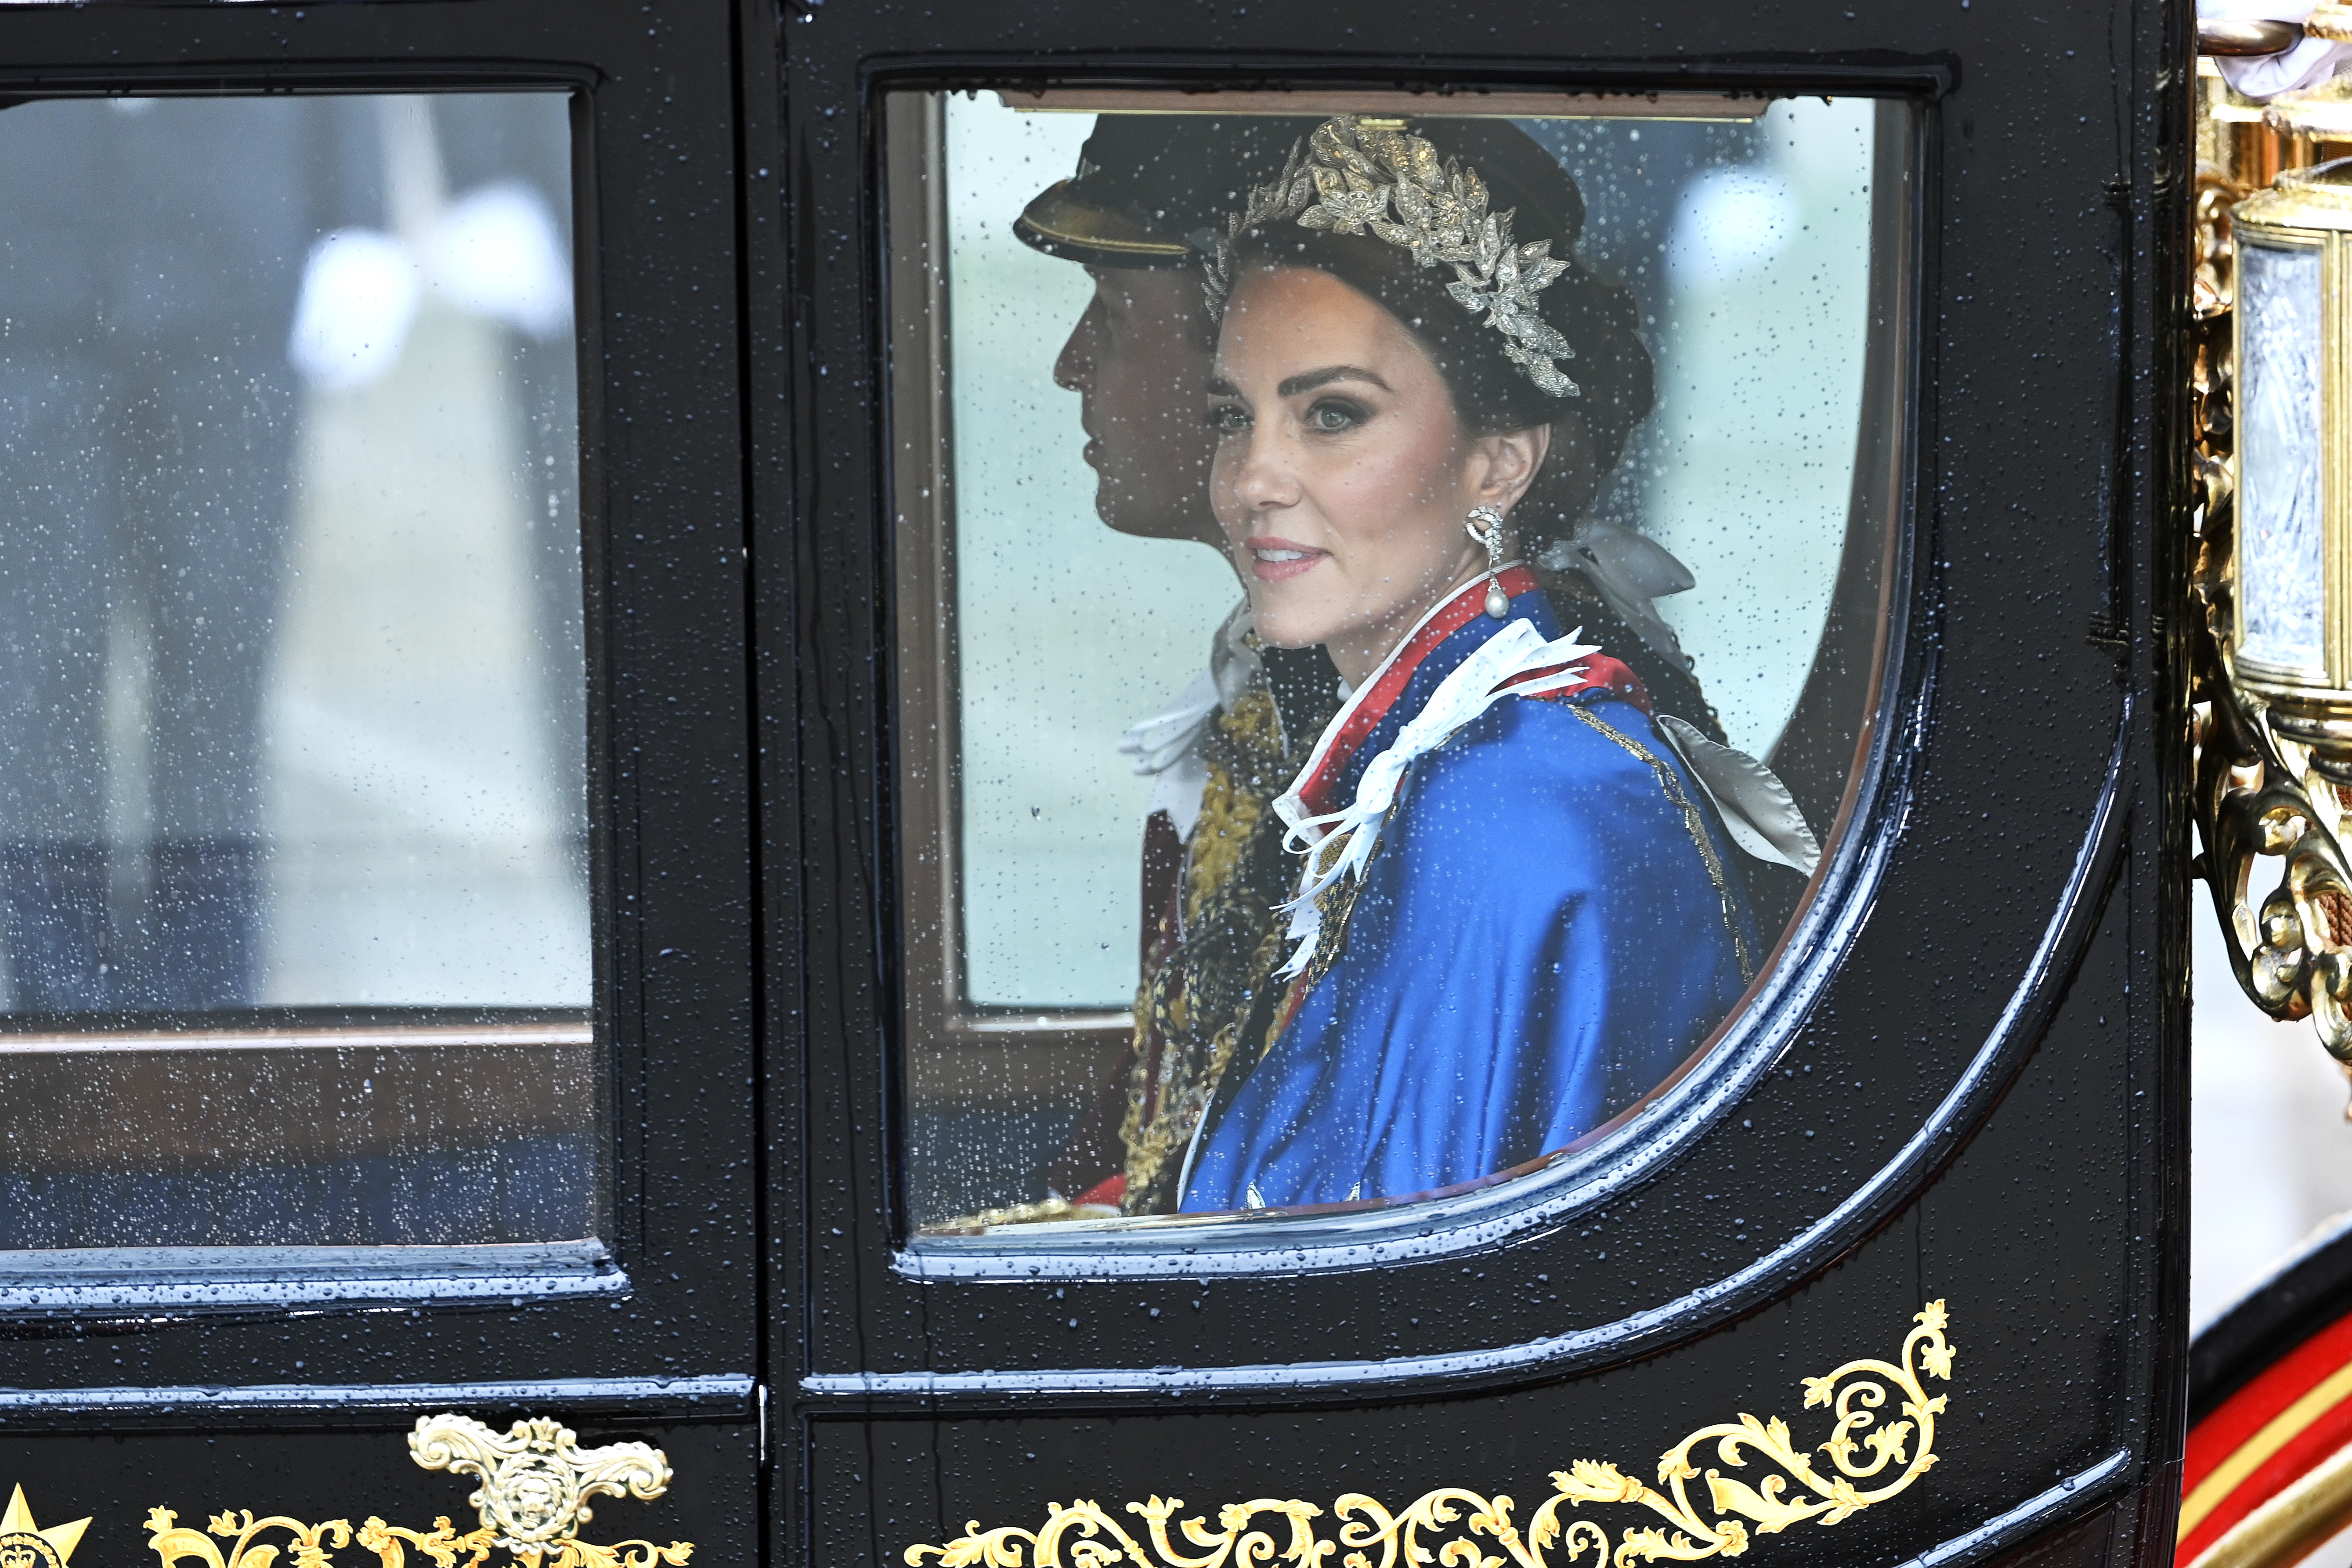  Kate Middleton bucks tradition with a new kind of 'tiara' - this is the story behind it  